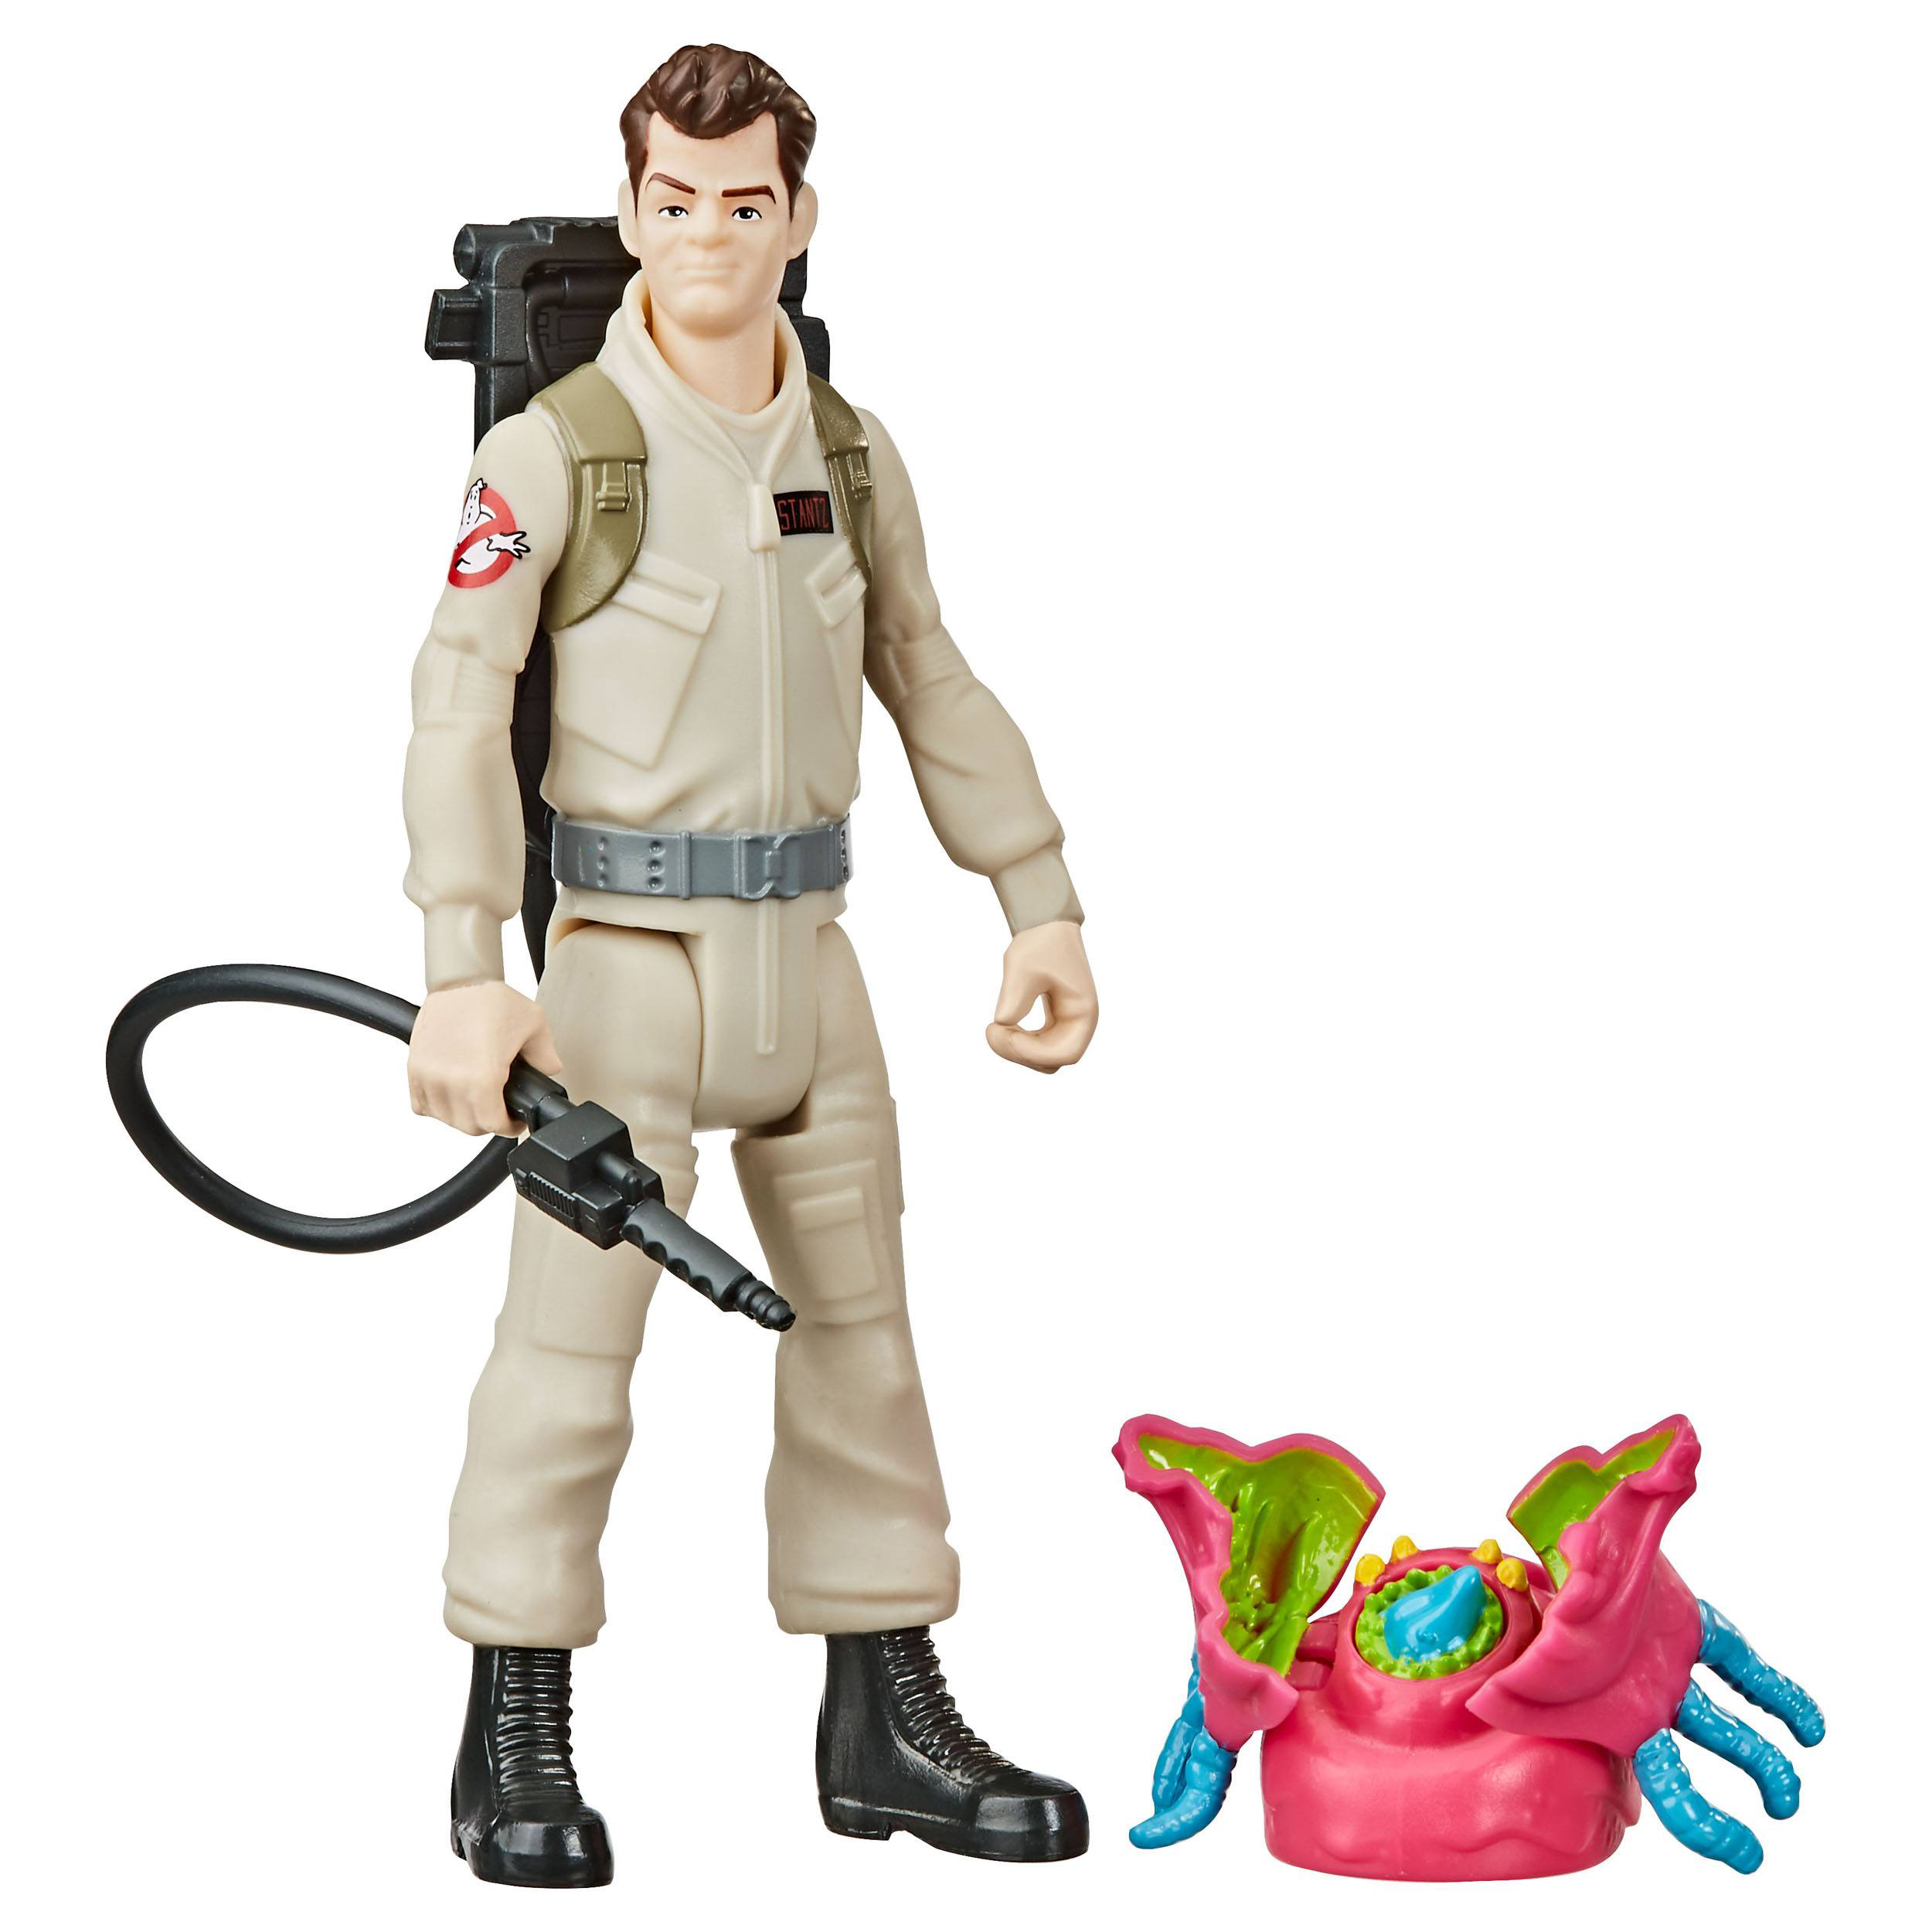 Ghostbusters Actionfigur | HASBRO 13 Geisterschreck Figur: cm Action Feature Stantz Ray Fright F9765